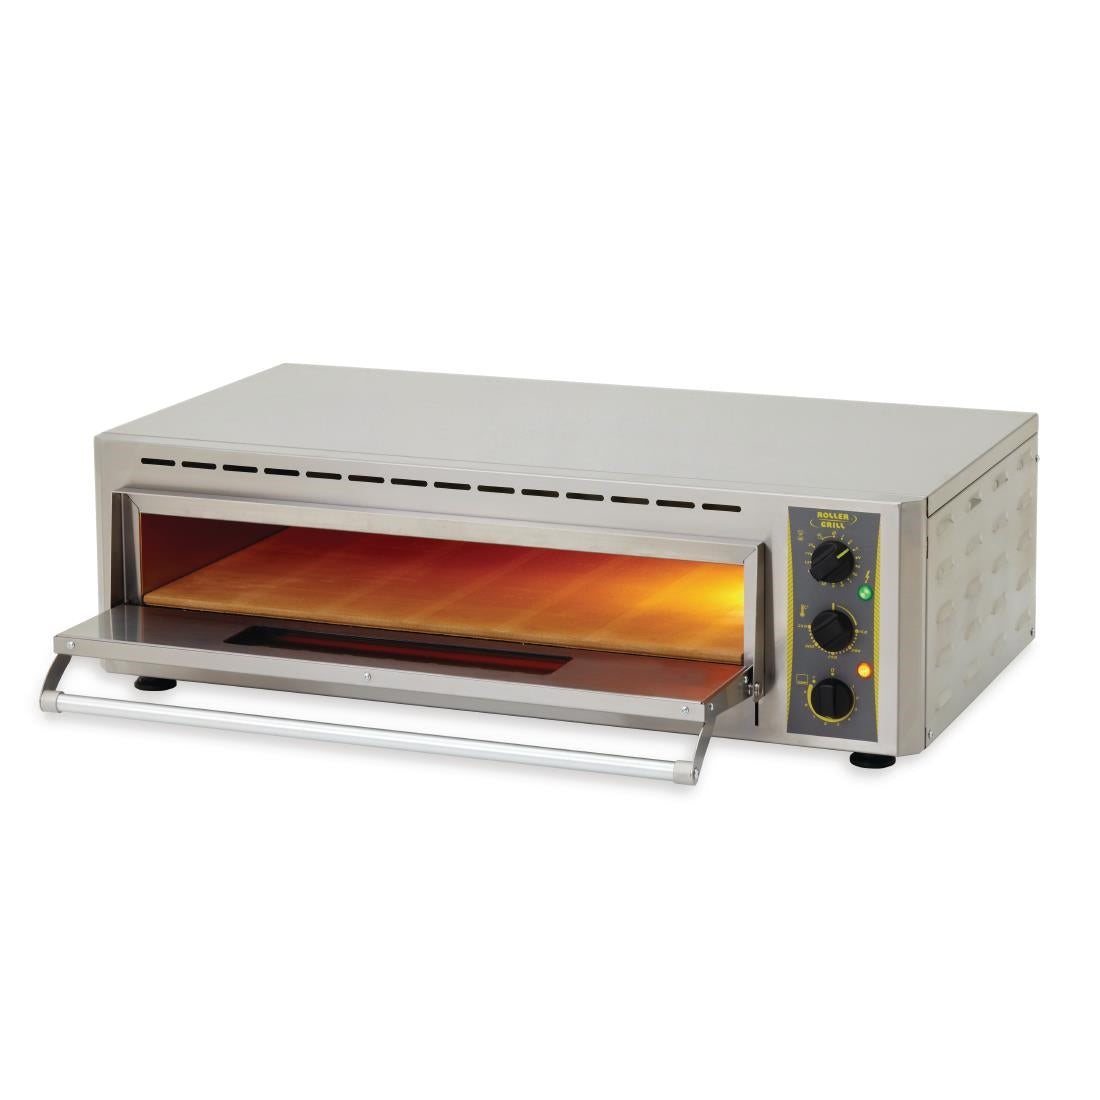 DA185 Roller Grill Double Width Pizza Oven PZ4302 D JD Catering Equipment Solutions Ltd